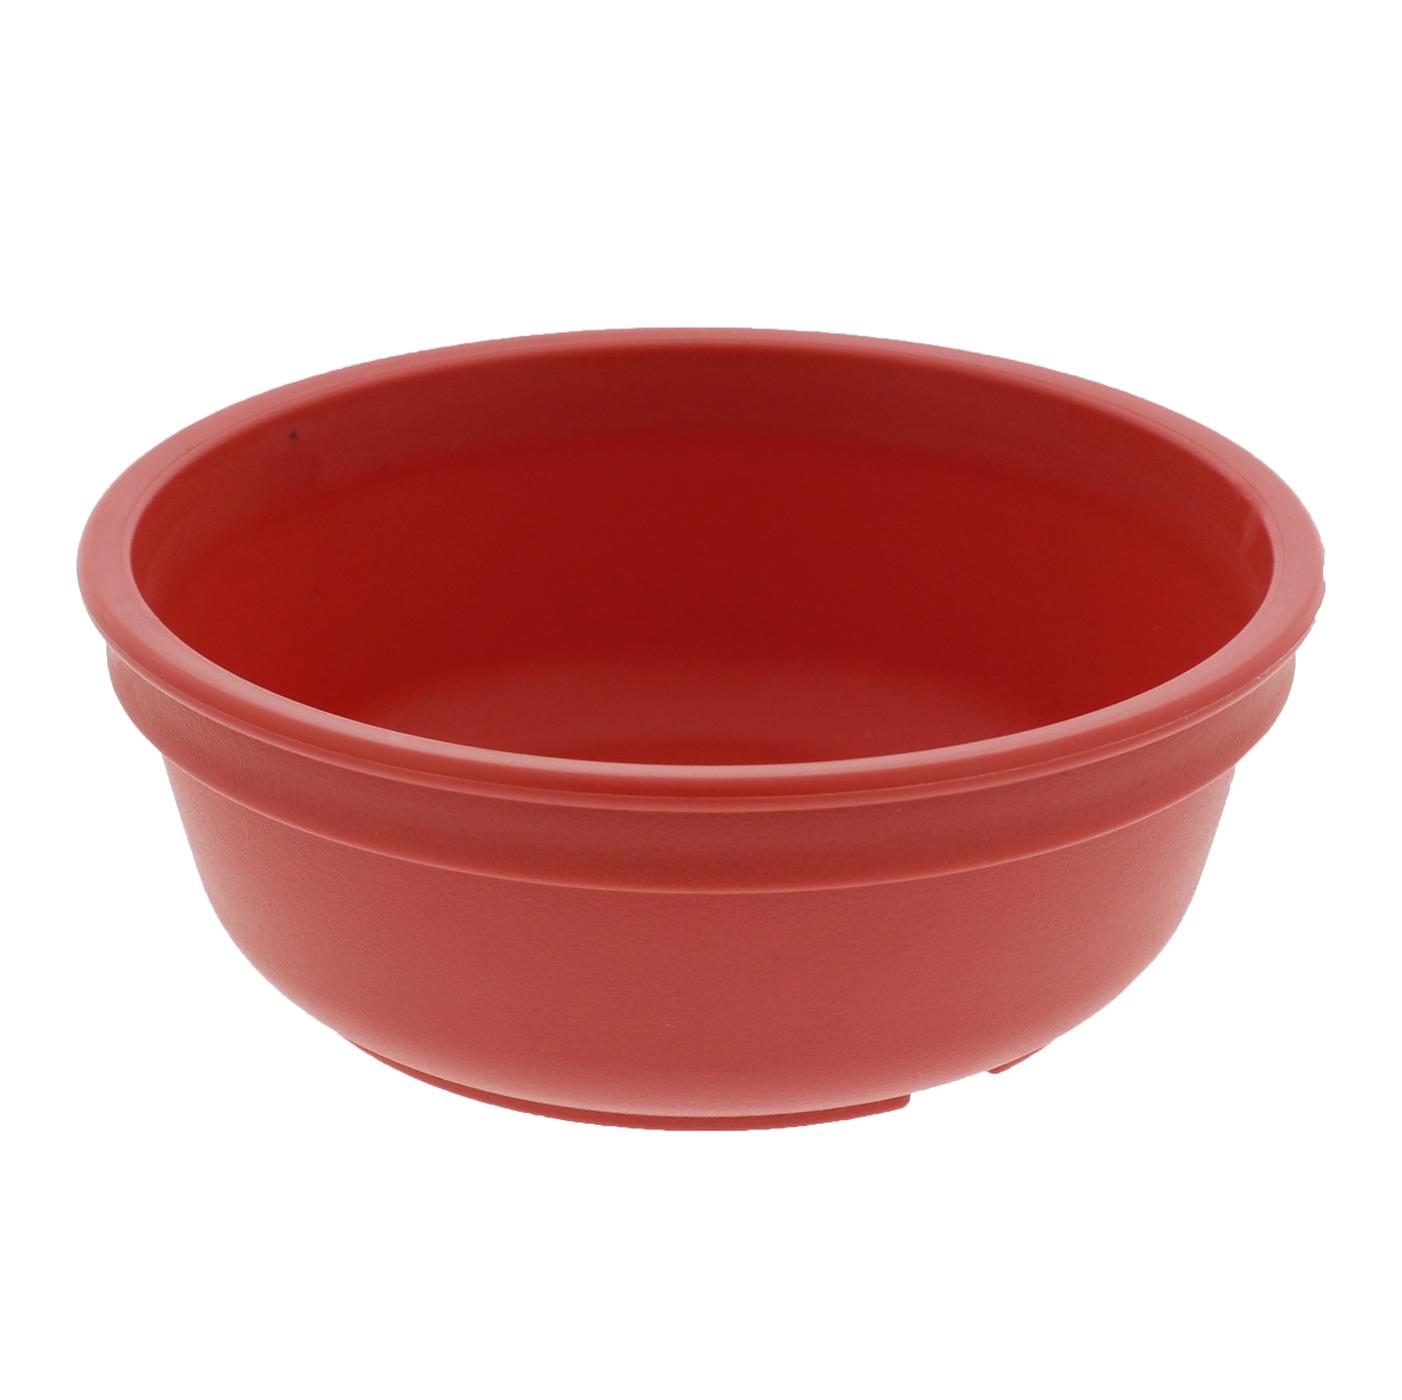 Re-Play Toddler Bowl, Assorted Colors; image 6 of 6